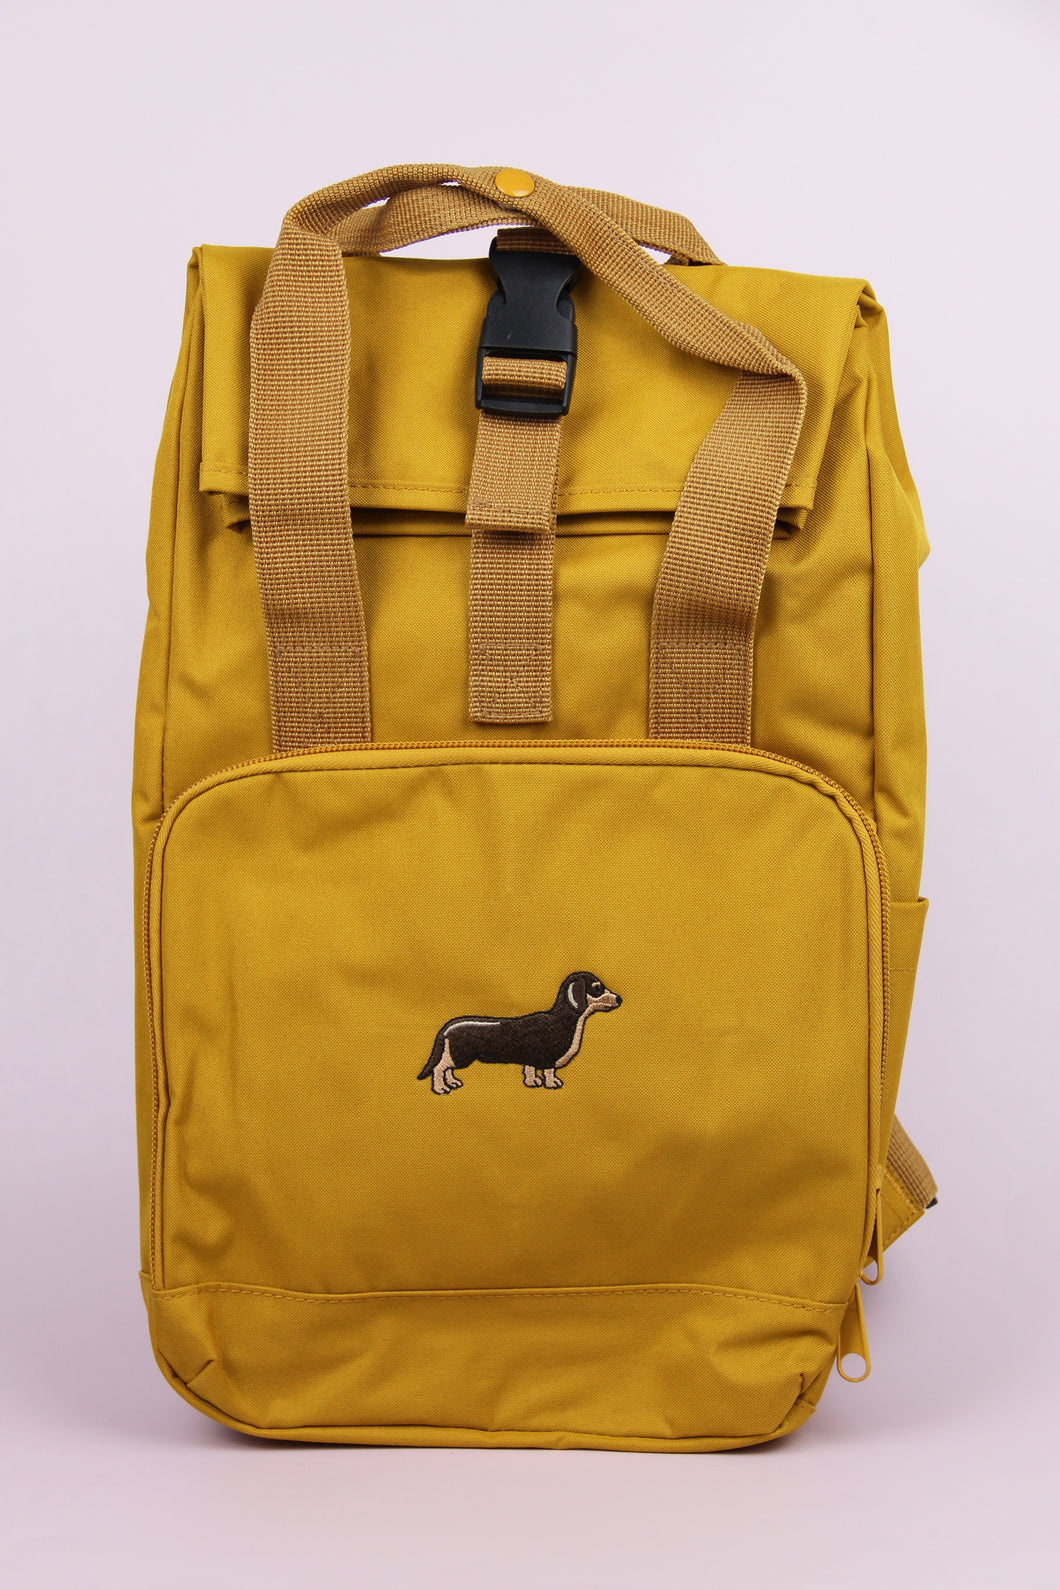 Dachshund Recycled Backpack - Mustard